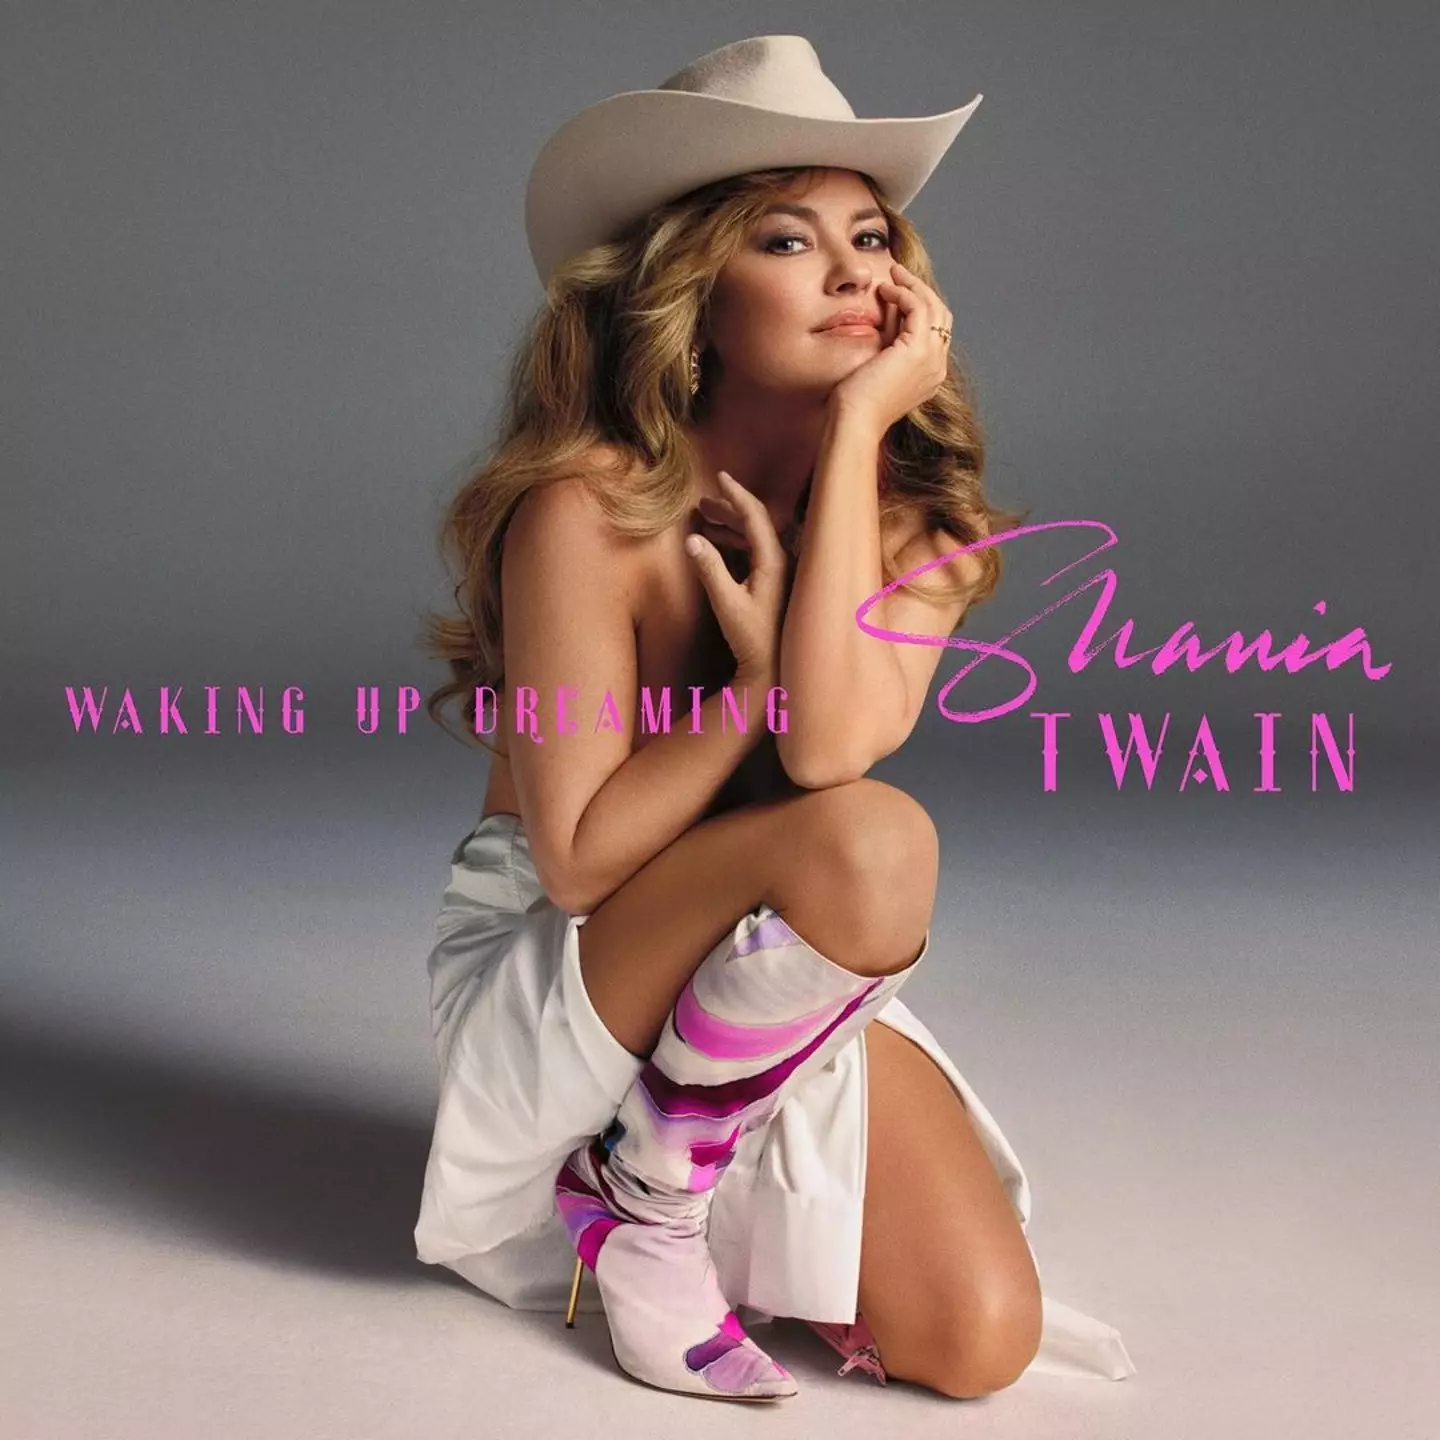 Shania Twain posed nude for the artwork for her new album.